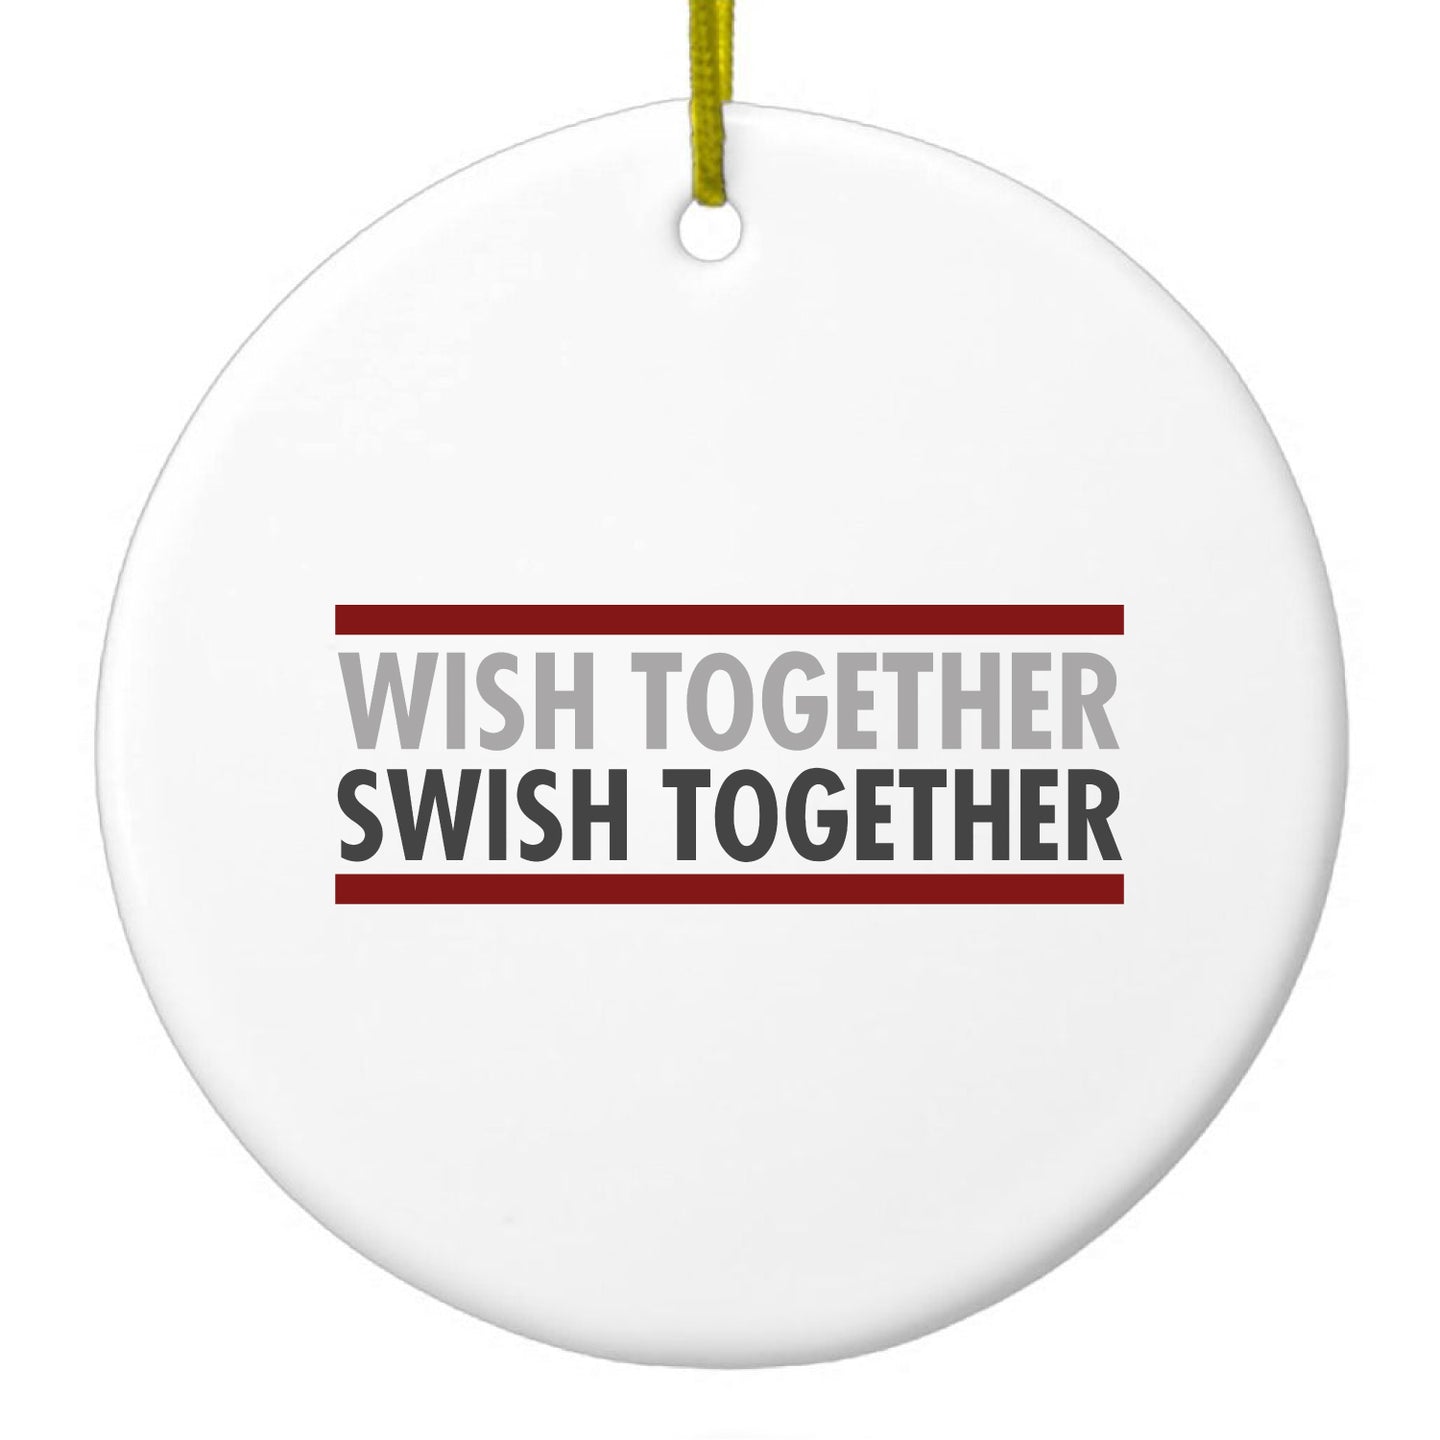 DistinctInk® Hanging Ceramic Christmas Tree Ornament with Gold String - Great Gift / Present - 2 3/4 inch Diameter - Wish Together Swish Together Basketball